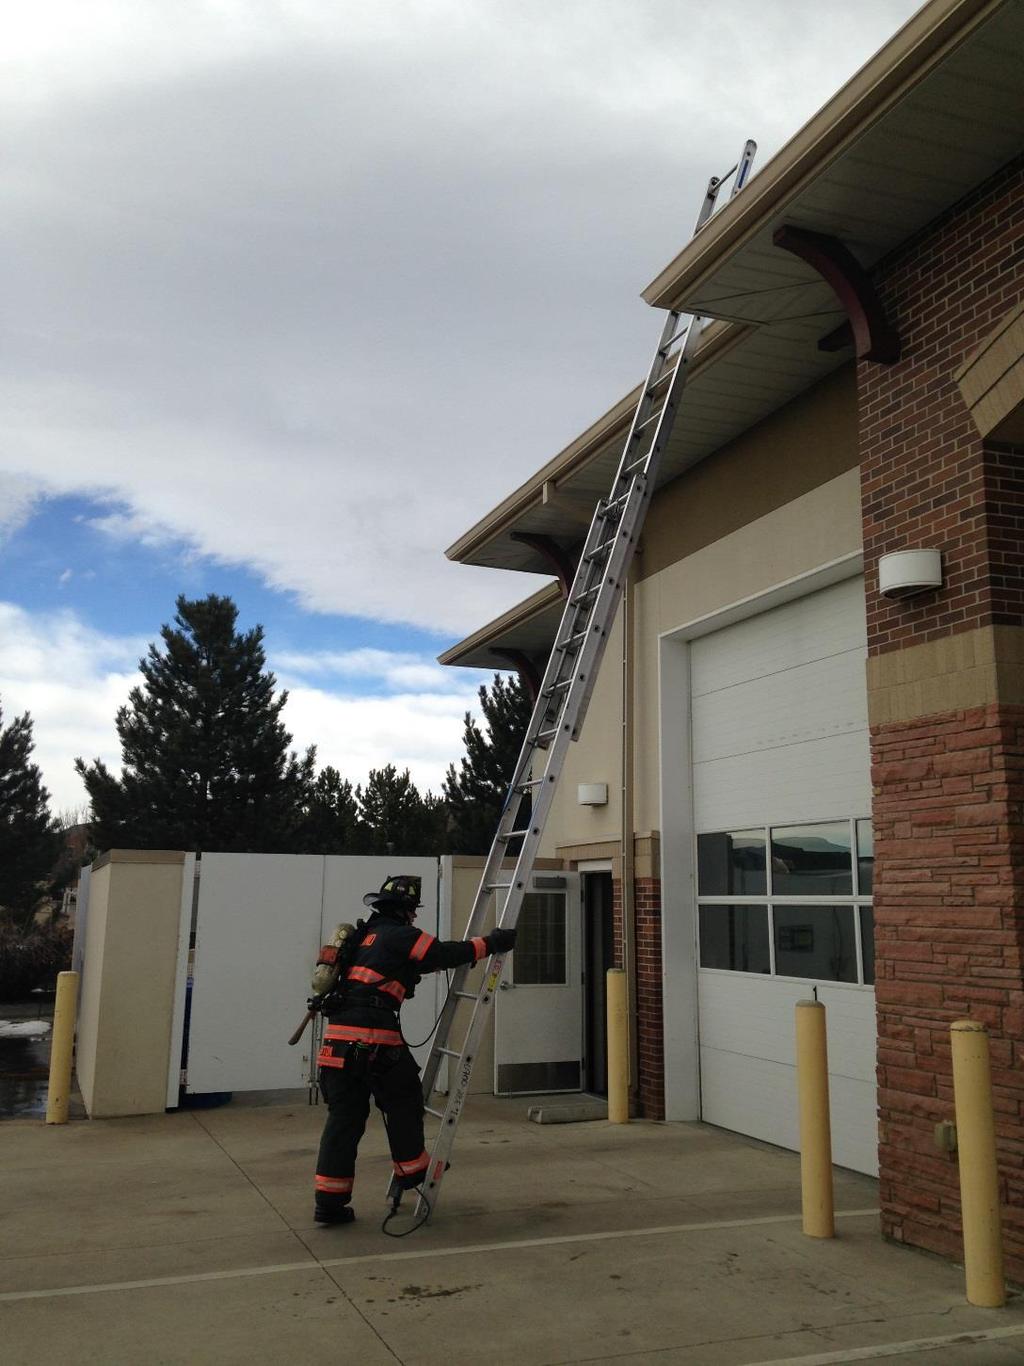 #6 Place the ladder into the building in a controlled manner. (Figure 27).